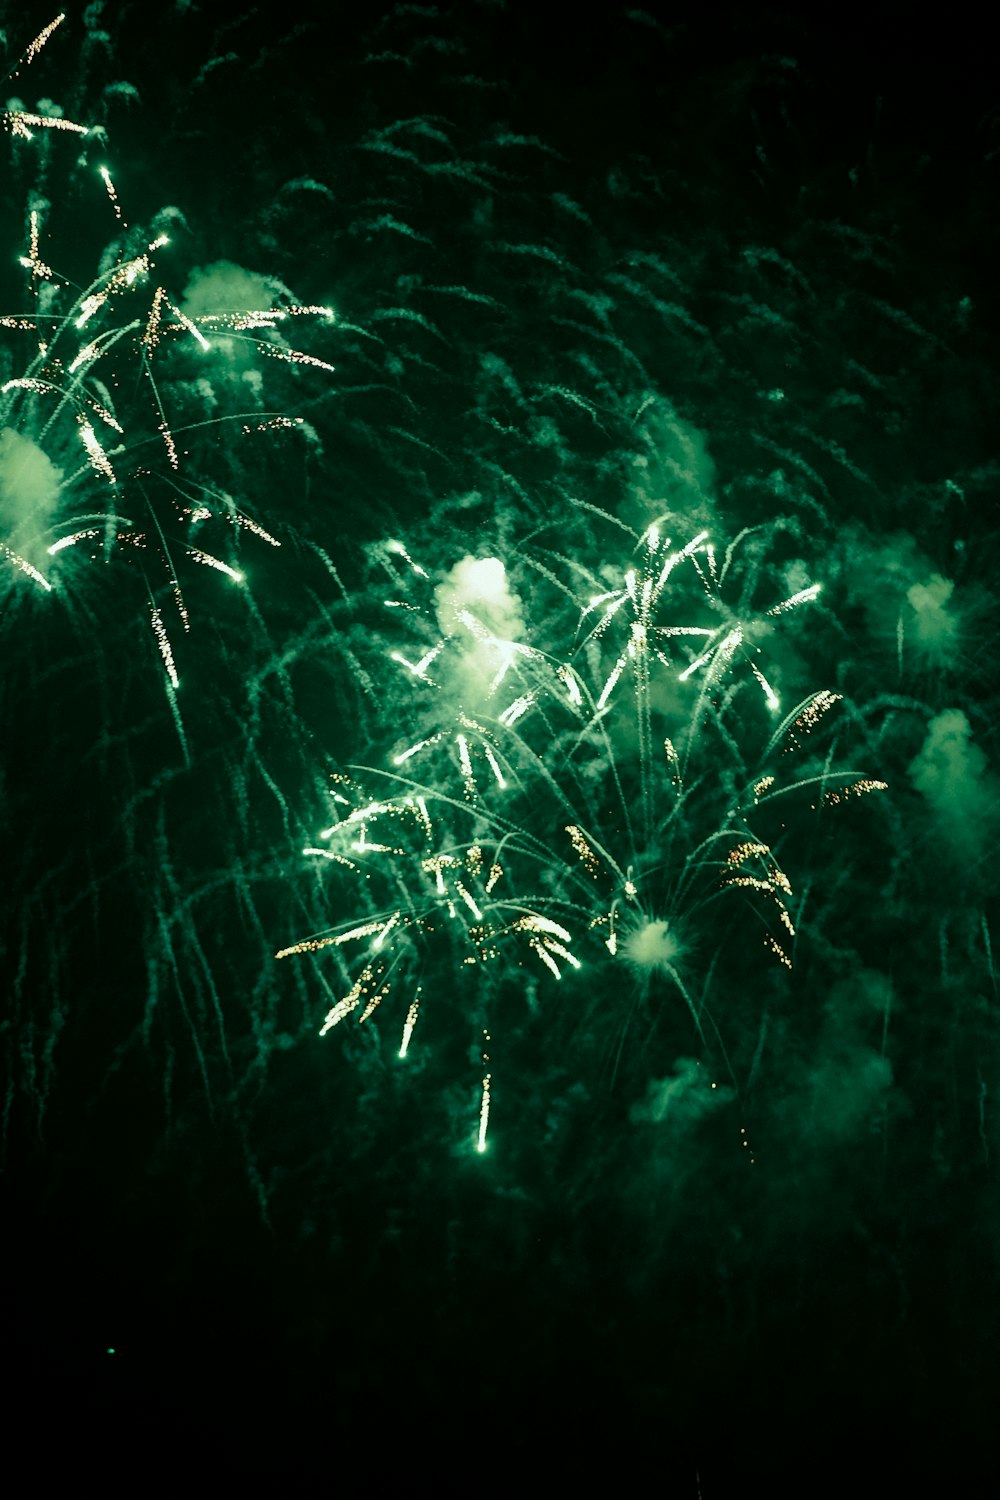 a green fireworks is lit up in the night sky